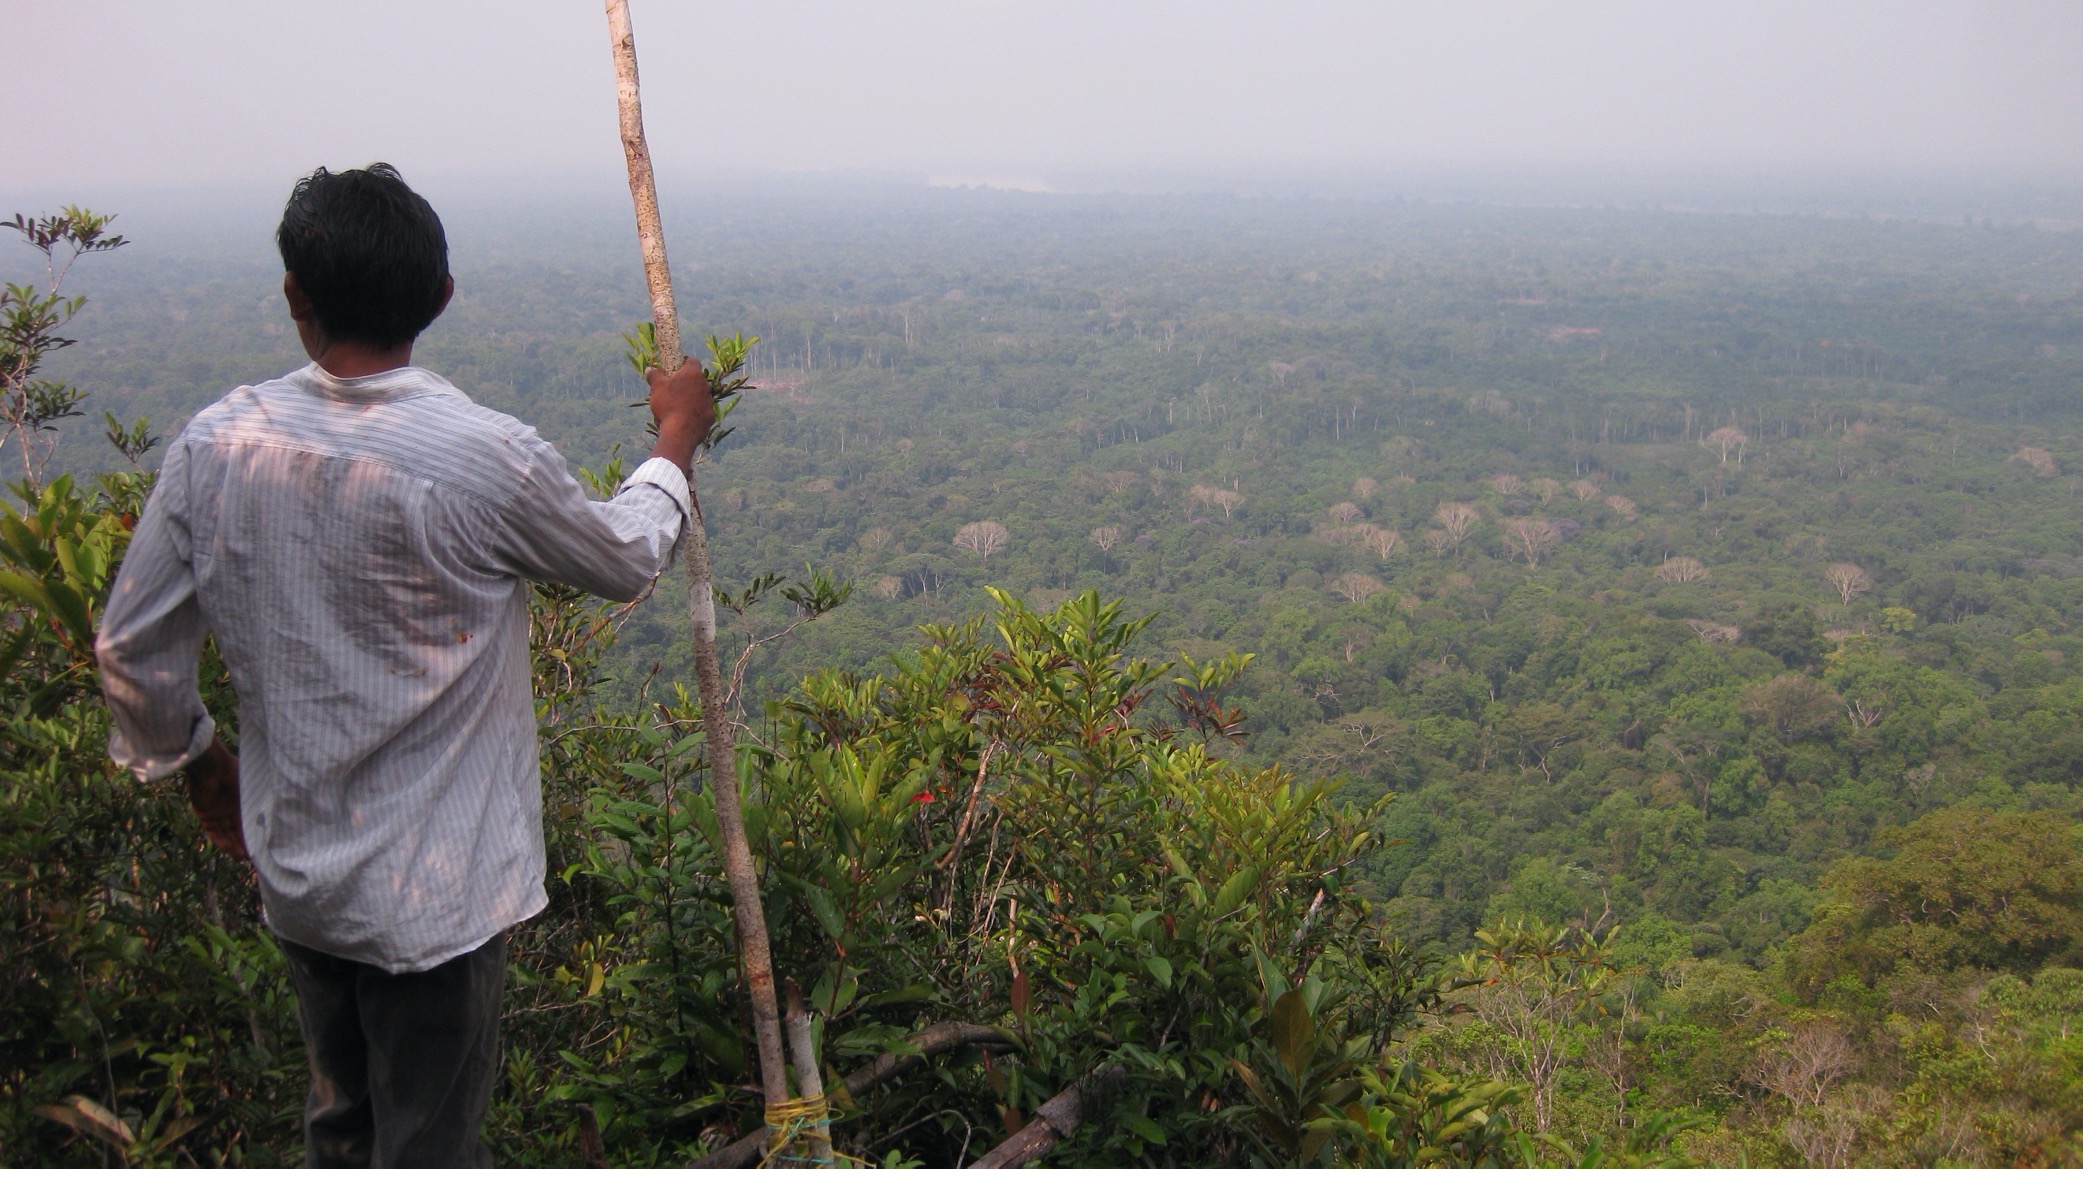 A Yucuna man overlooking Indigenous Lands in the Amazonian rainforest, where many languages are predicted to go extinct by the end of the 21st century. Photo: Rodrigo Cámara-Leret